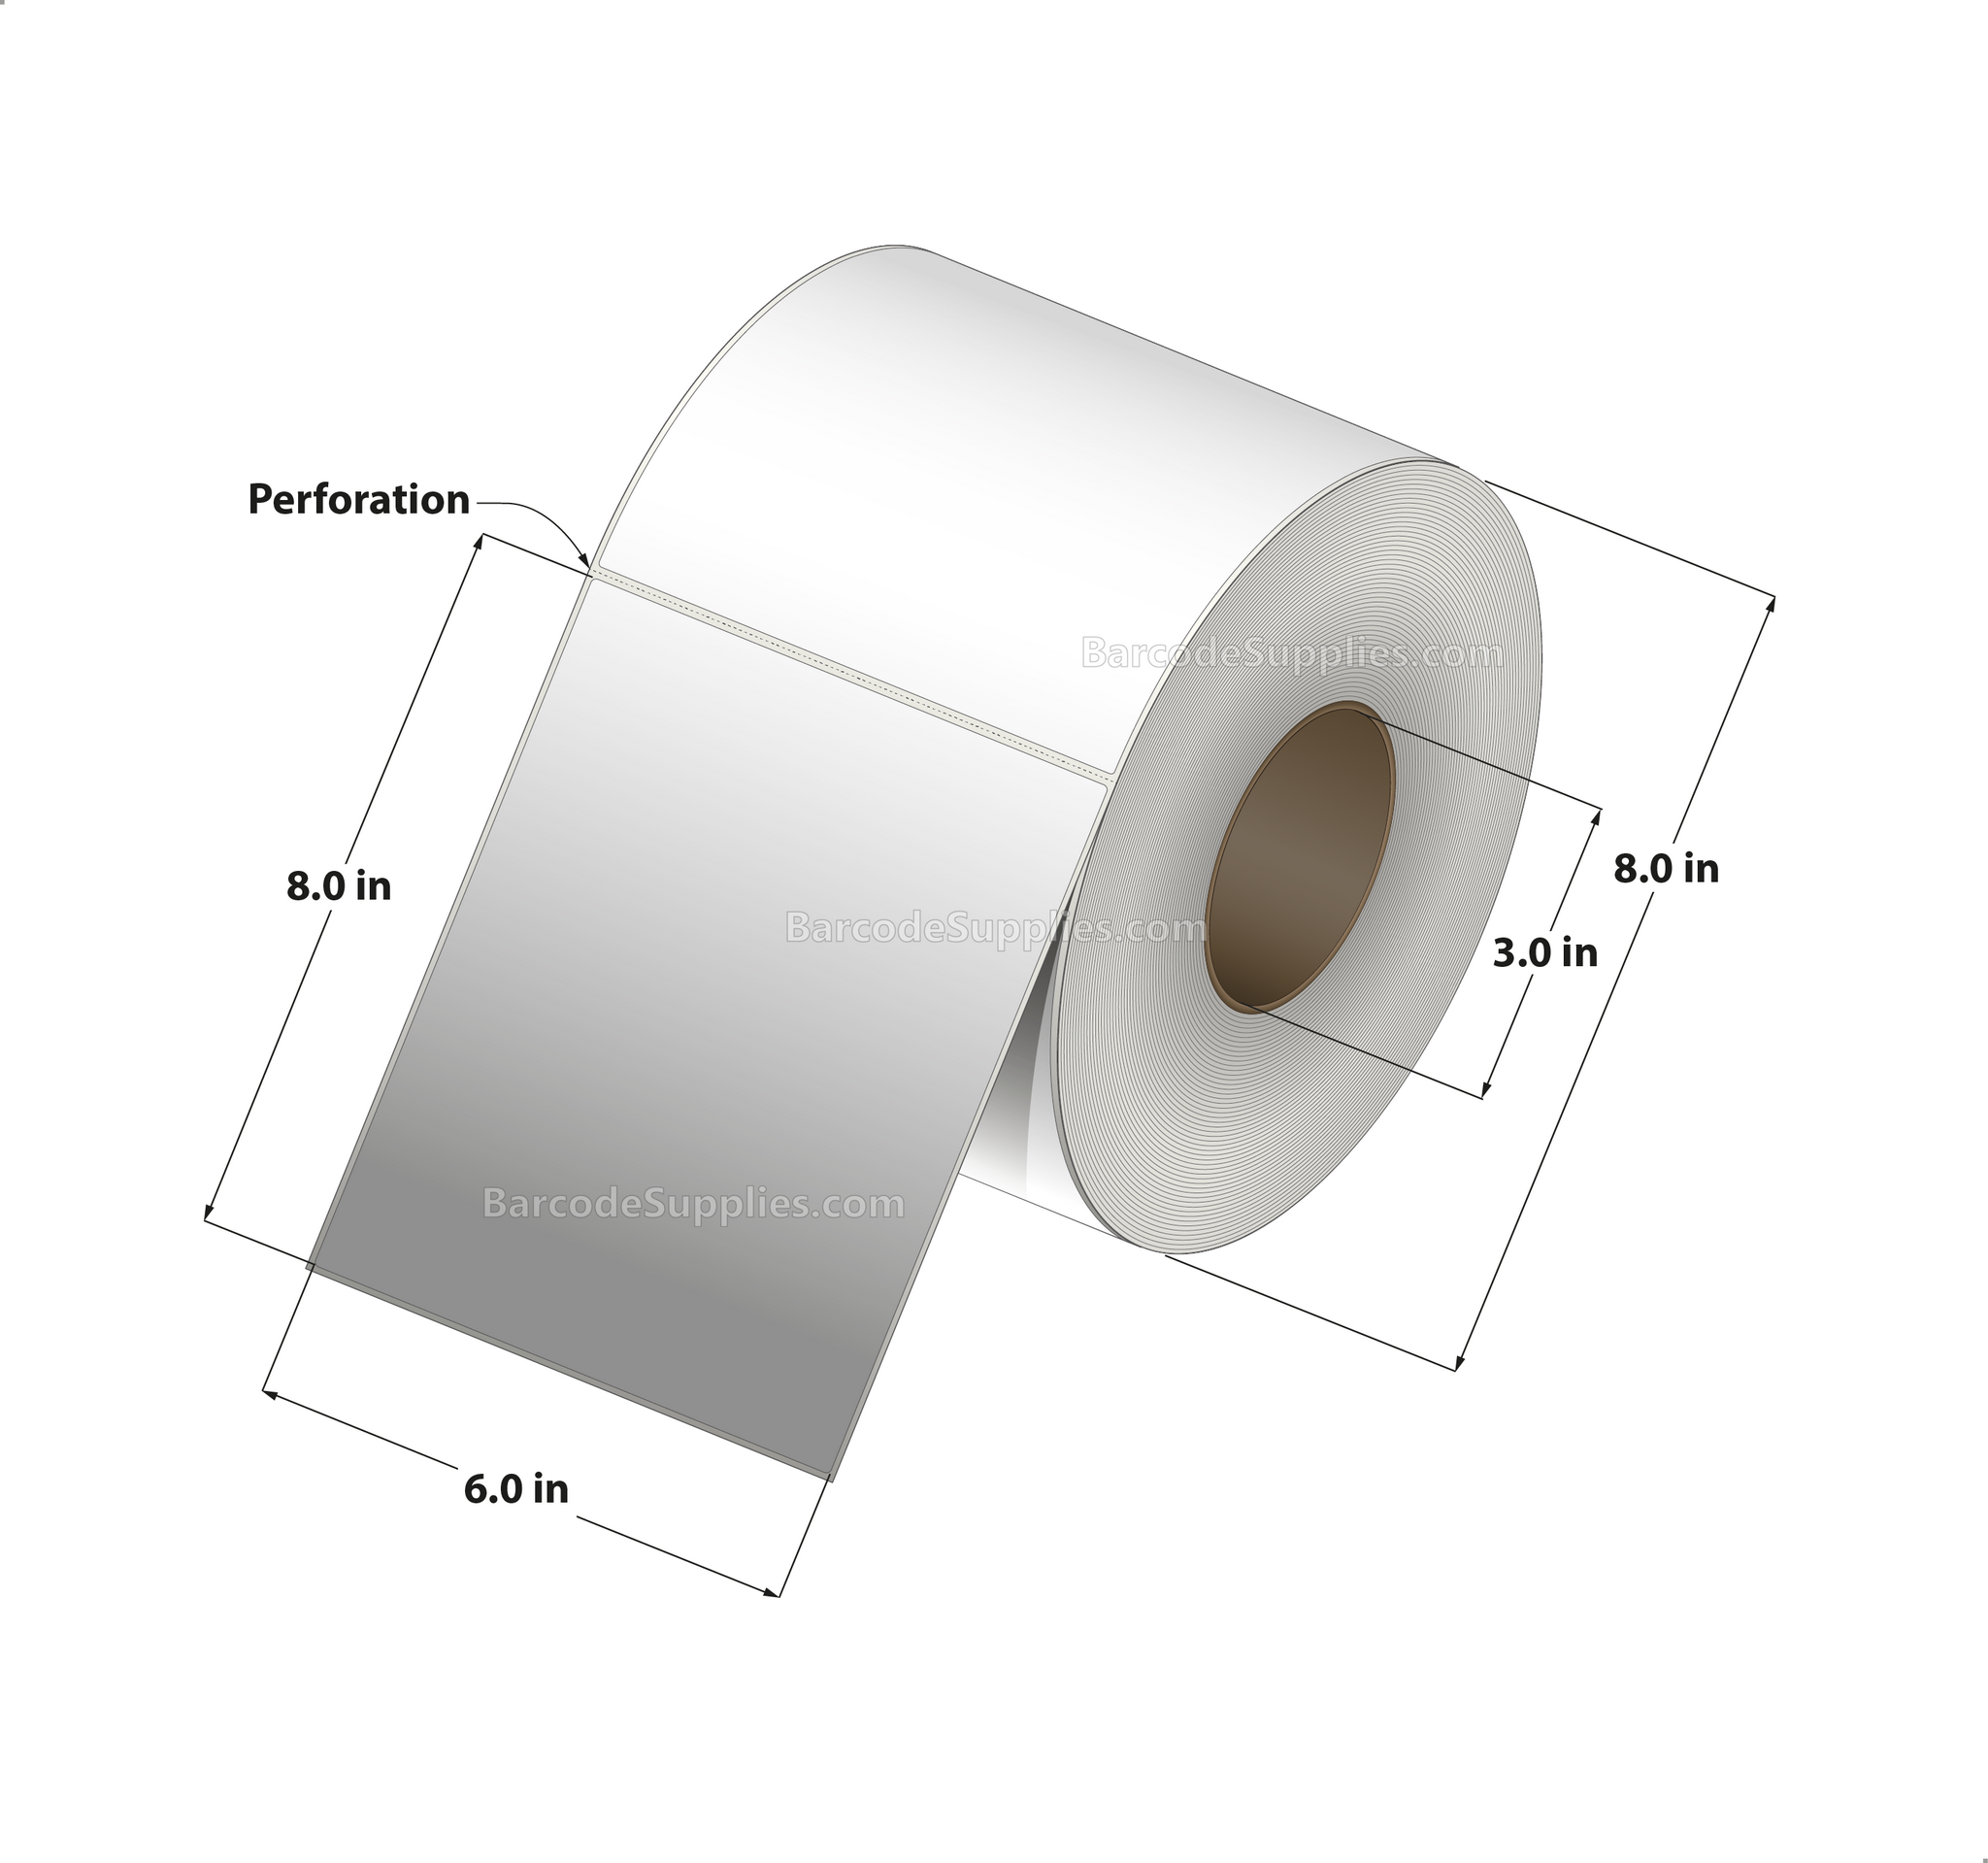 6 x 8 Thermal Transfer White Labels With Permanent Adhesive - Perforated - 750 Labels Per Roll - Carton Of 4 Rolls - 3000 Labels Total - MPN: RT-6-8-750-3